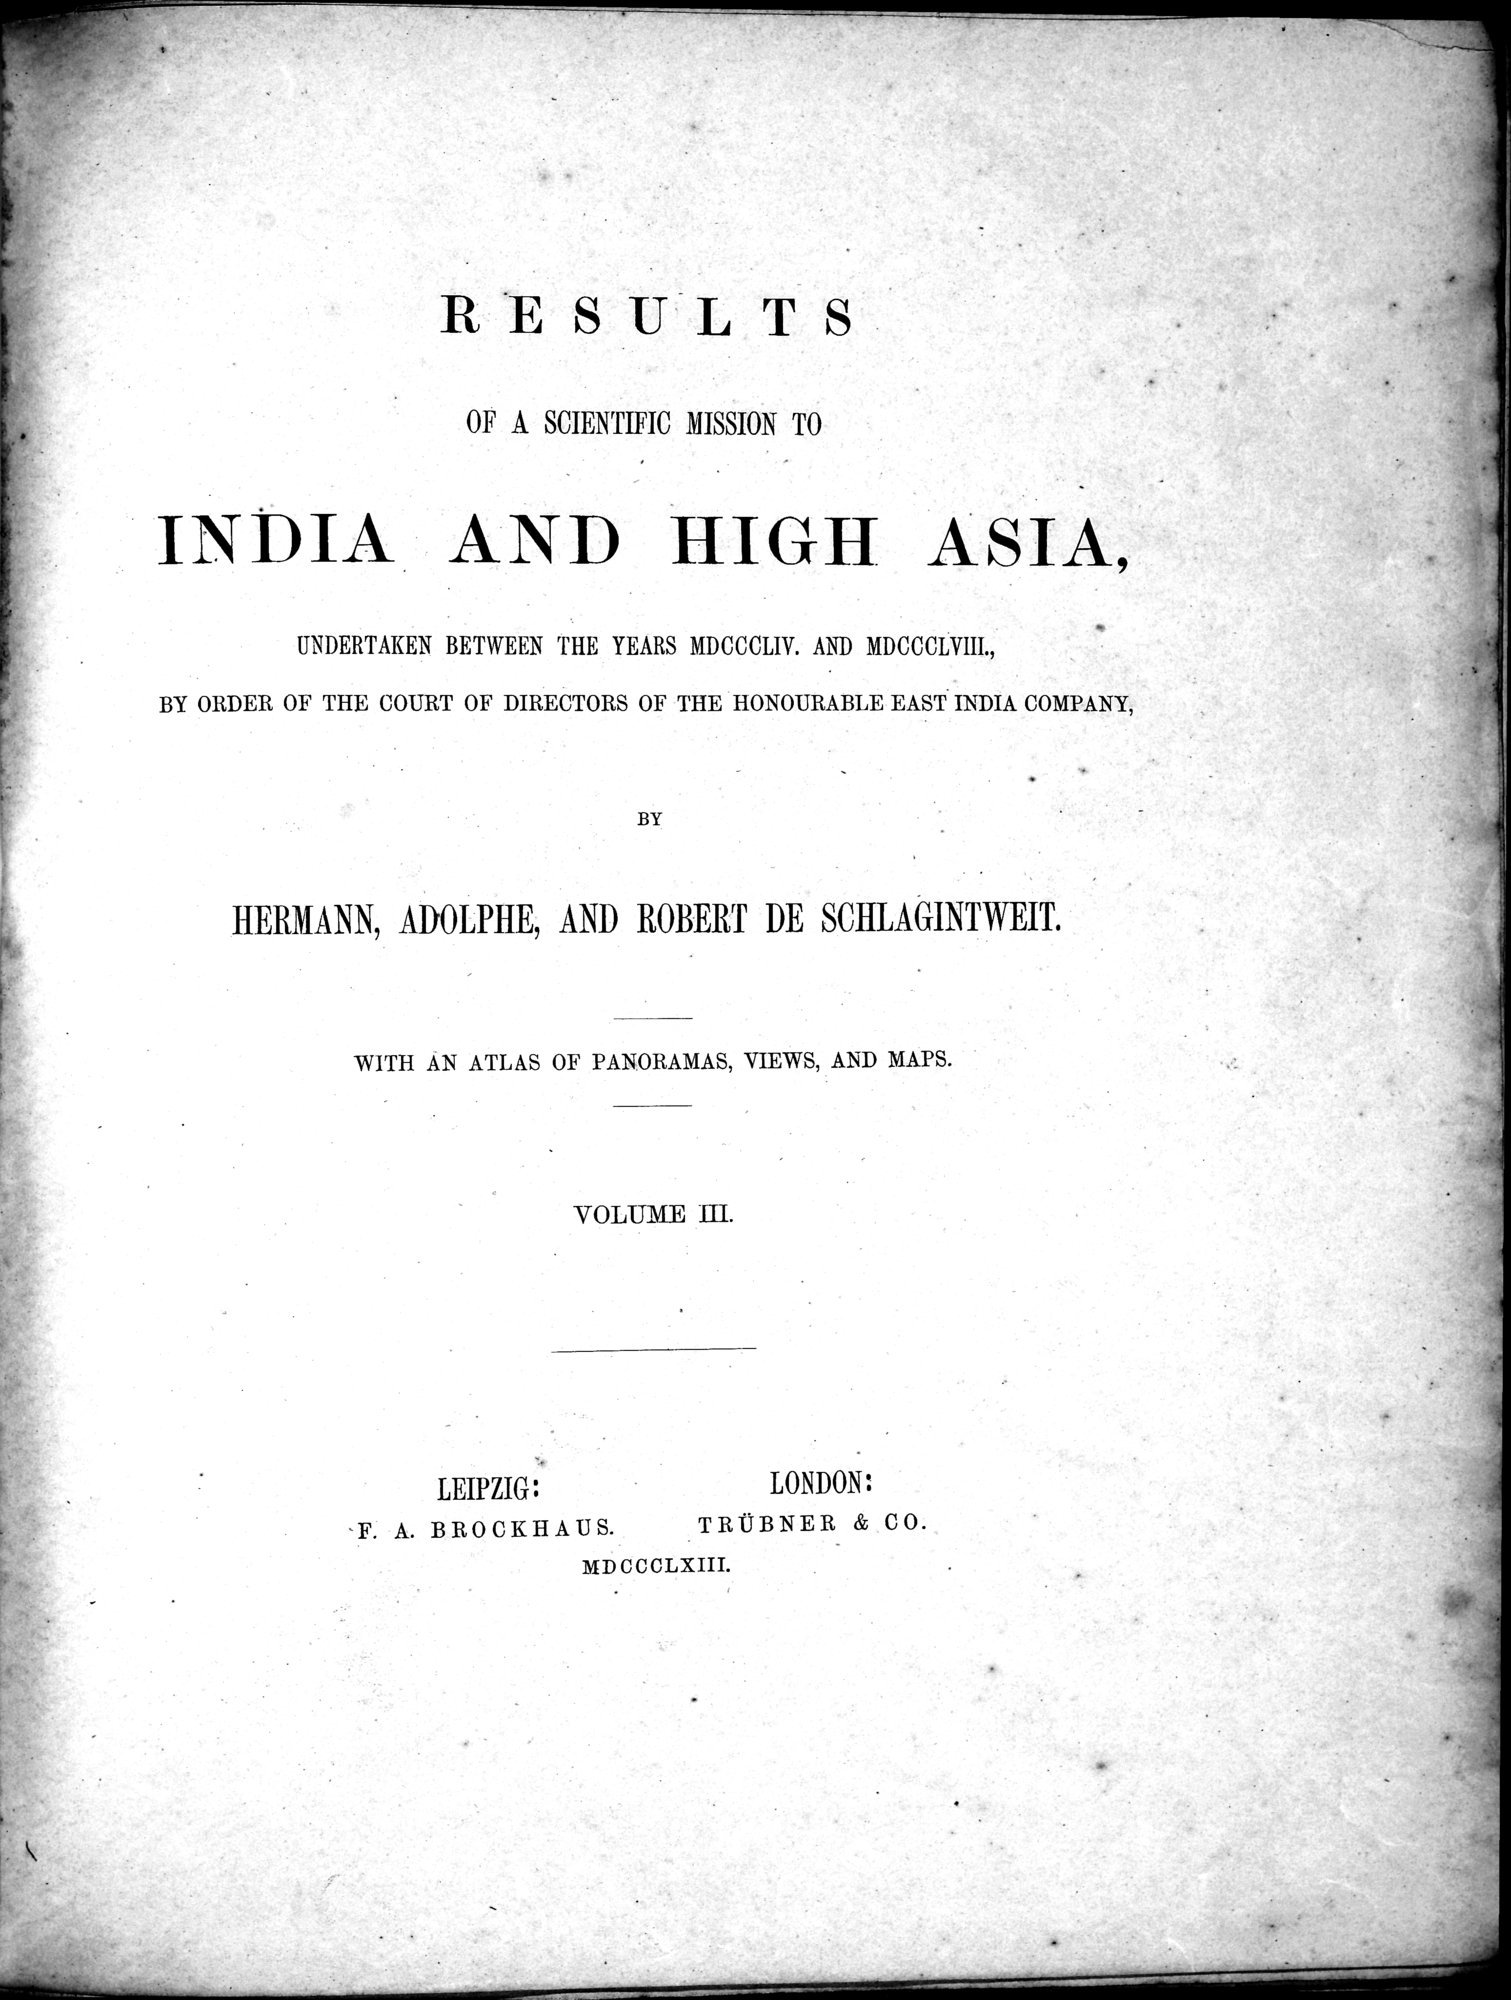 Results of a Scientific Mission to India and High Asia : vol.3 / 7 ページ（白黒高解像度画像）